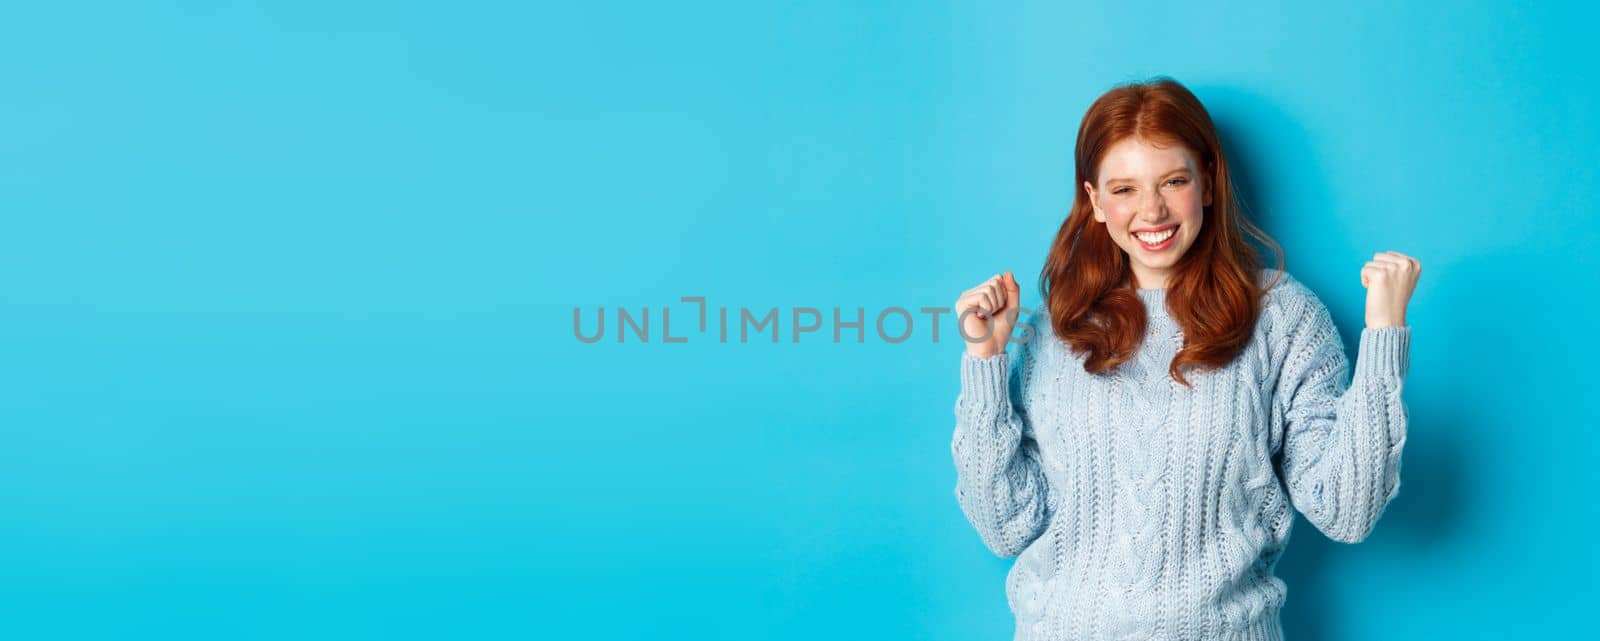 Satisfied redhead girl achieve goal and celebrating, making fist pump gesture and smiling delighted, triumphing of win, standing against blue background.